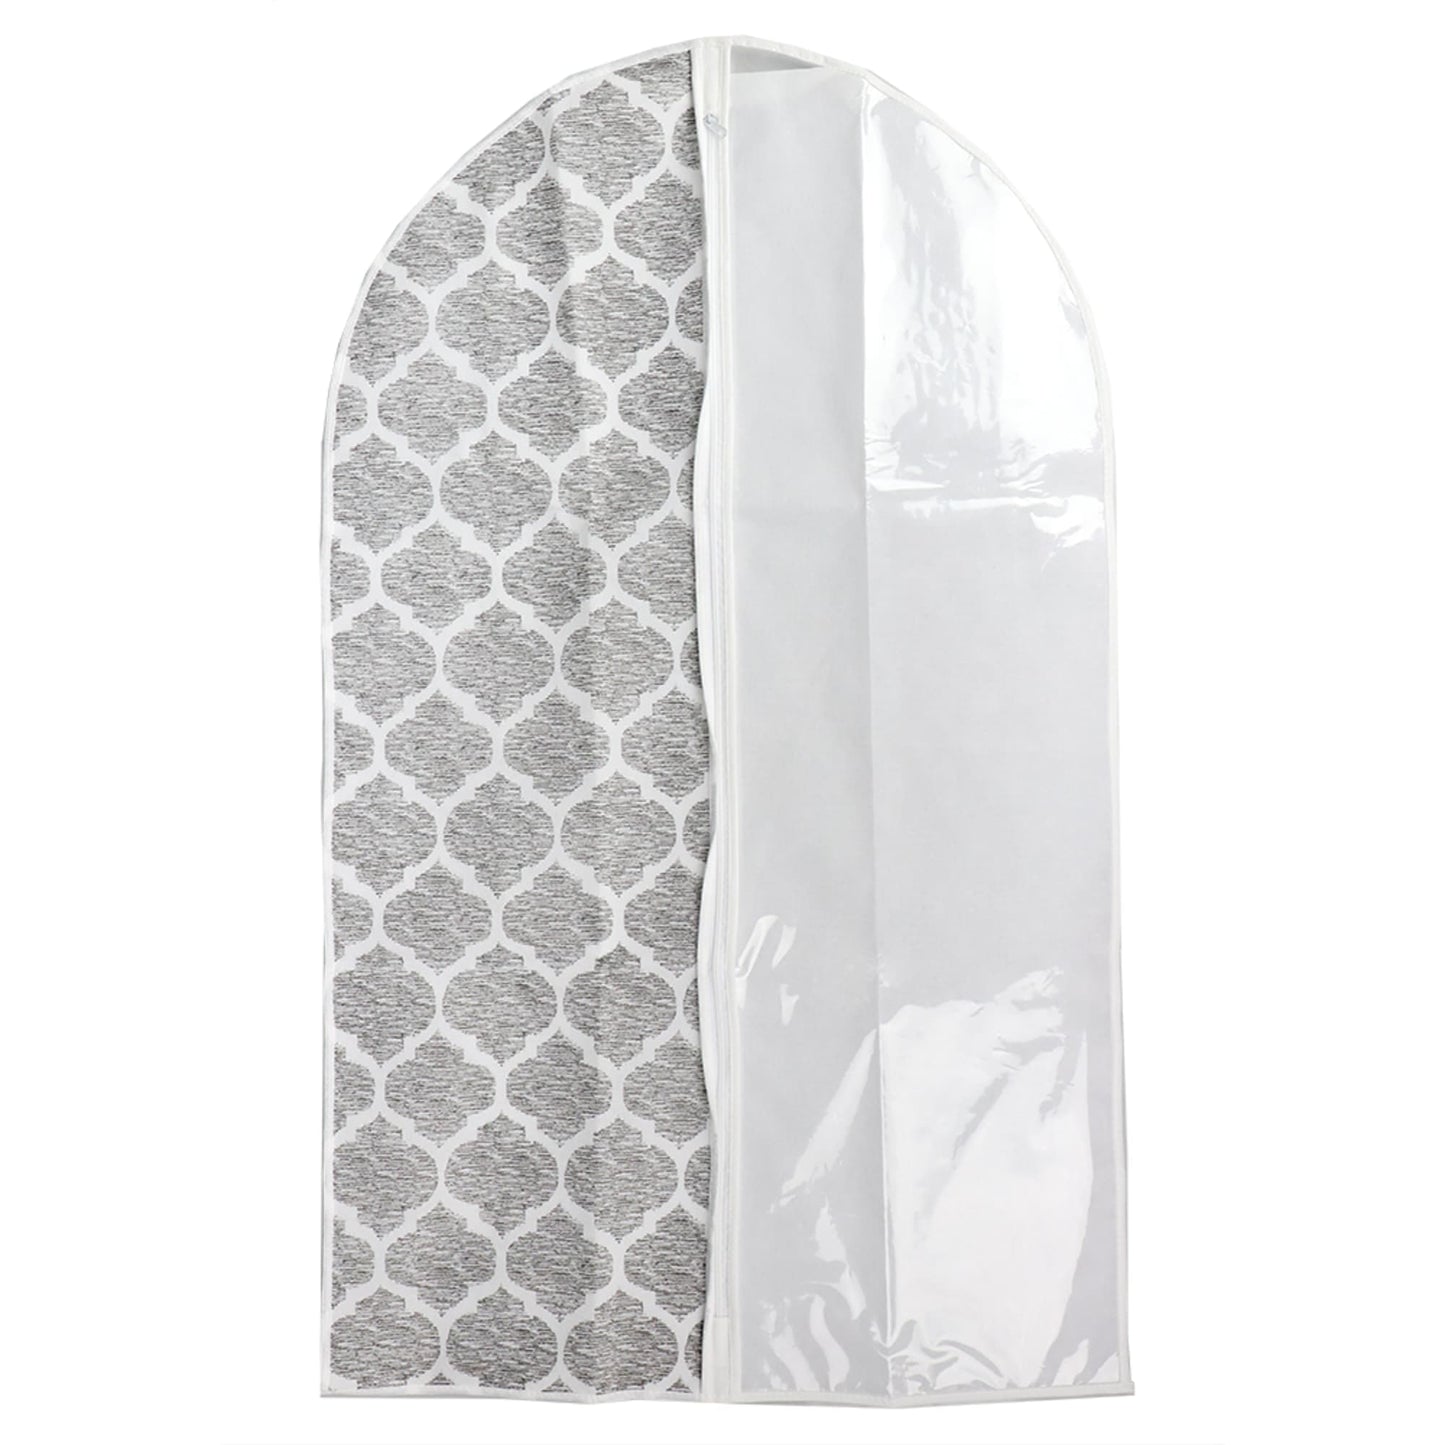 Arabesque Non-Woven Suit Bag with Clear Plastic Panel, White